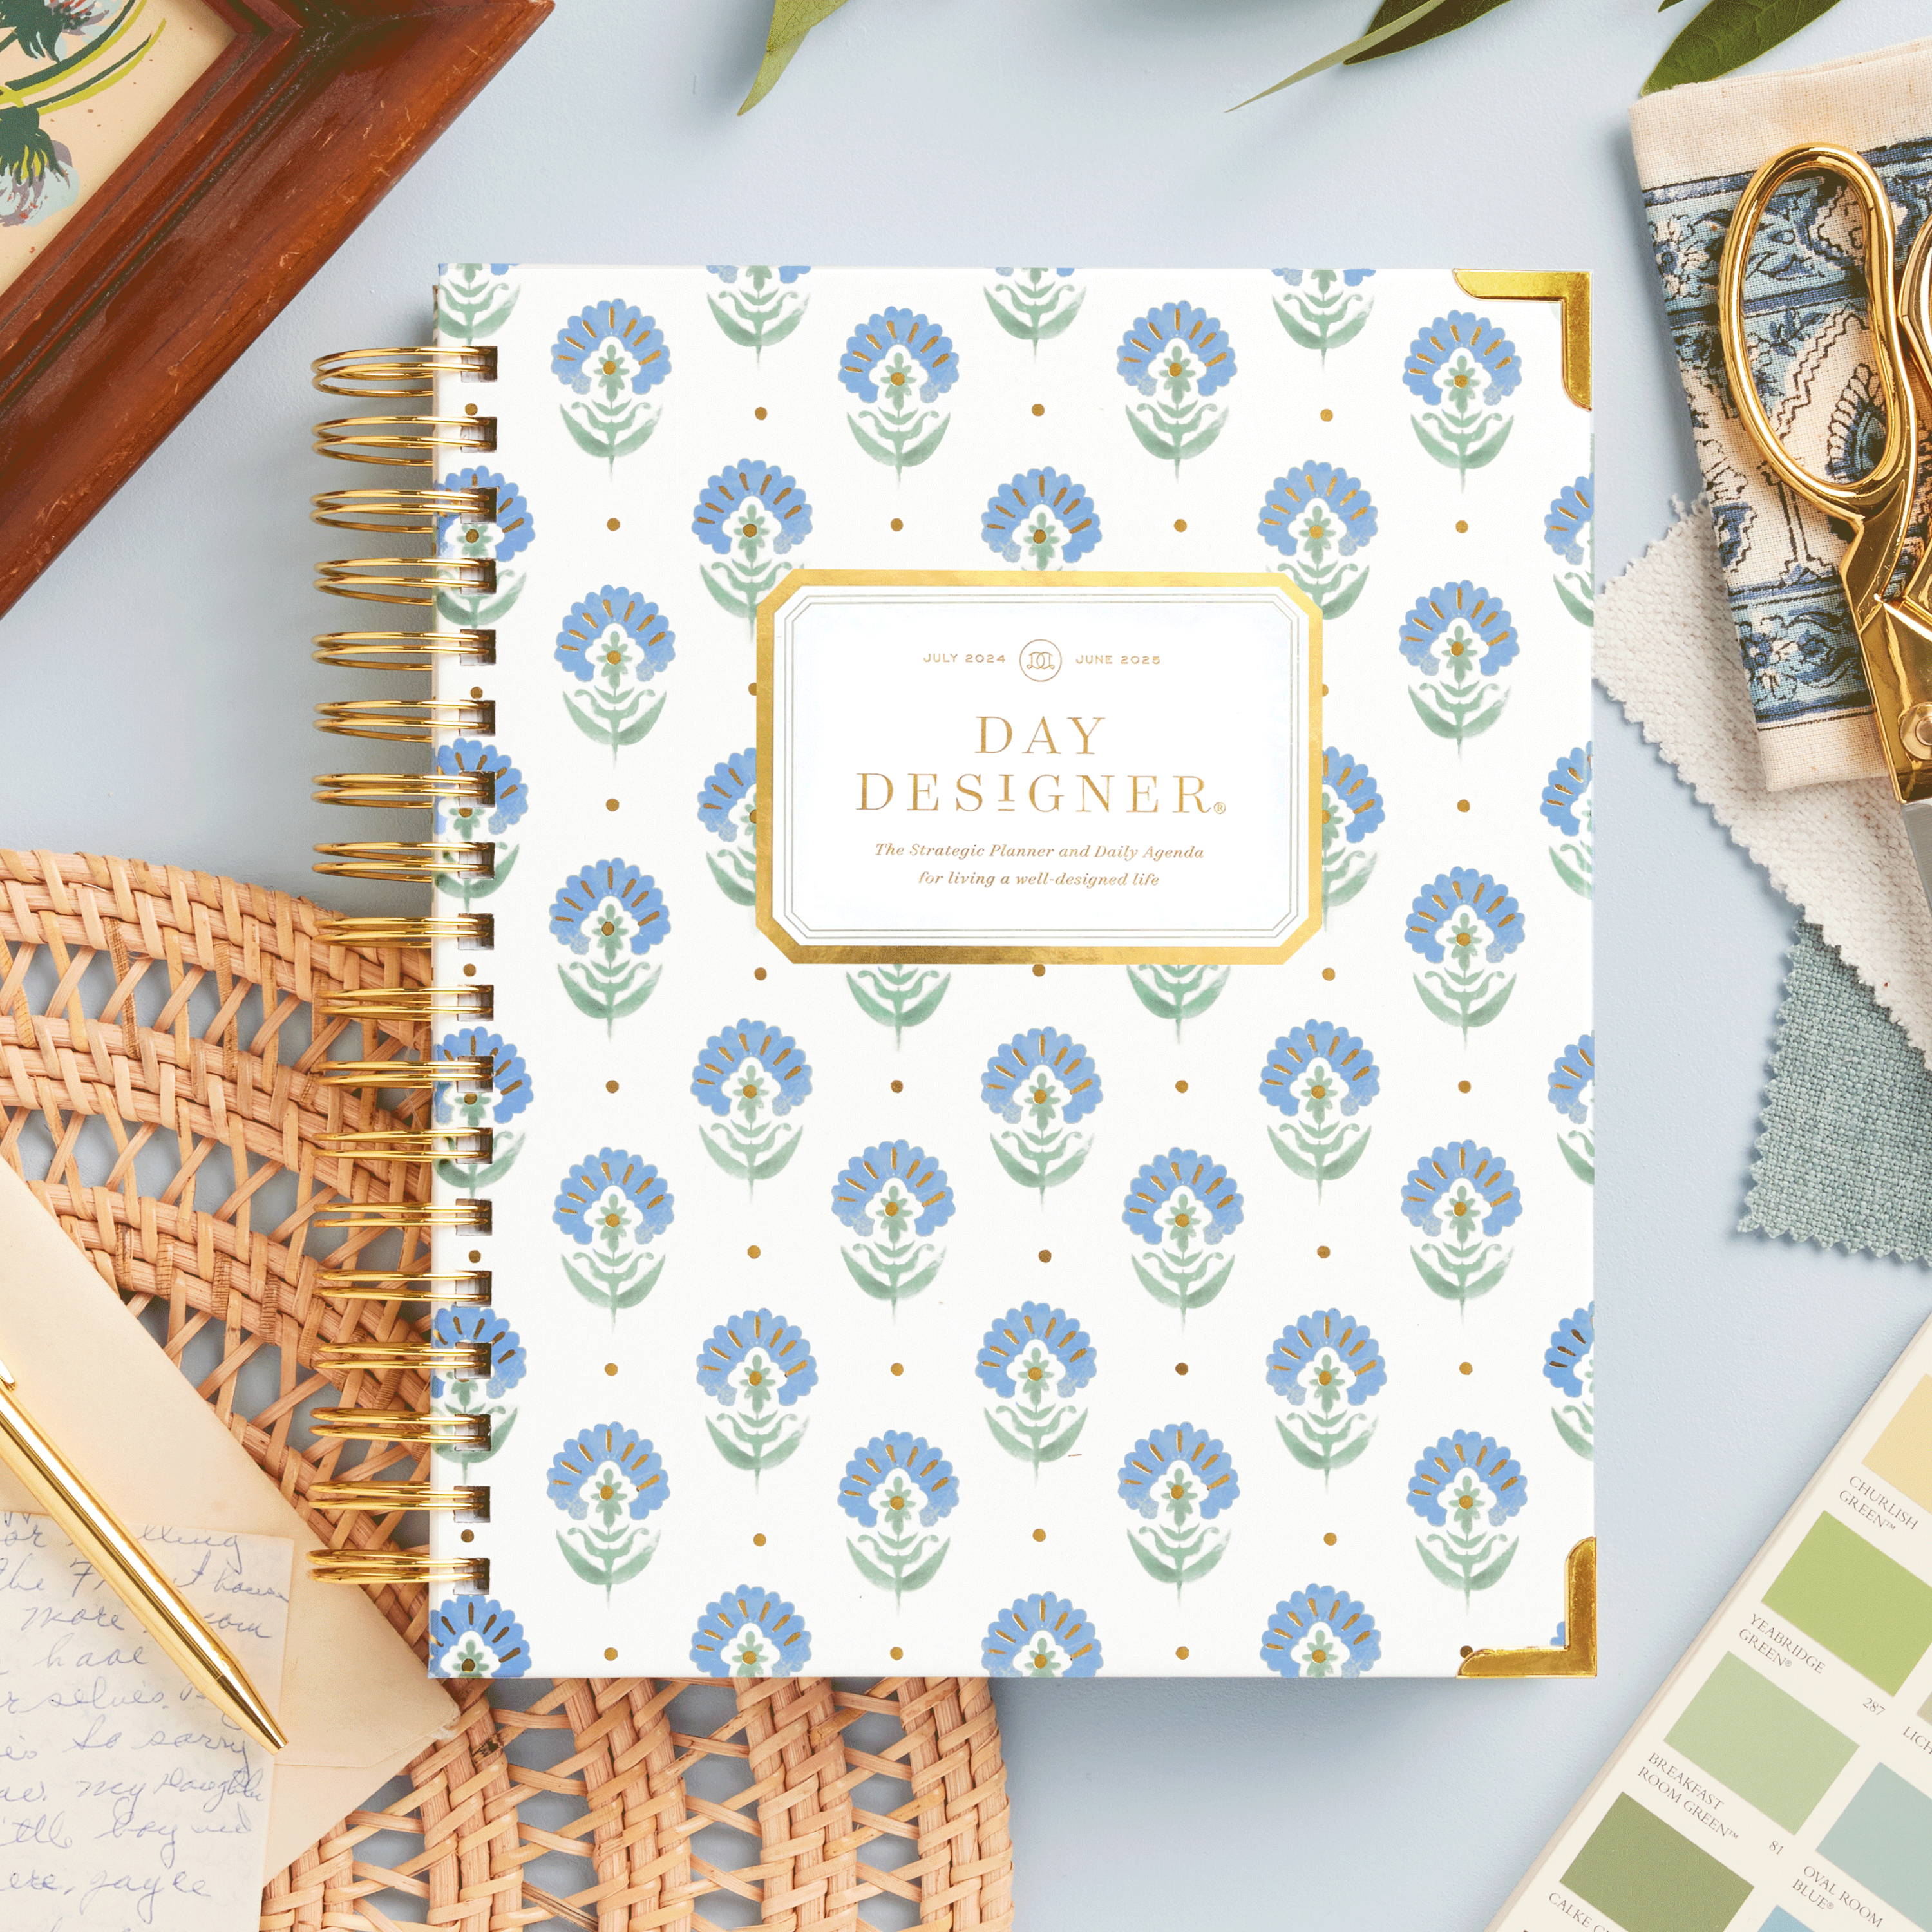 blue and green flower pattern closed book planner on light blue background, with wood picture frame, wicker placement, gold pen and stationery, paint color swatch and fabric, gold scissors